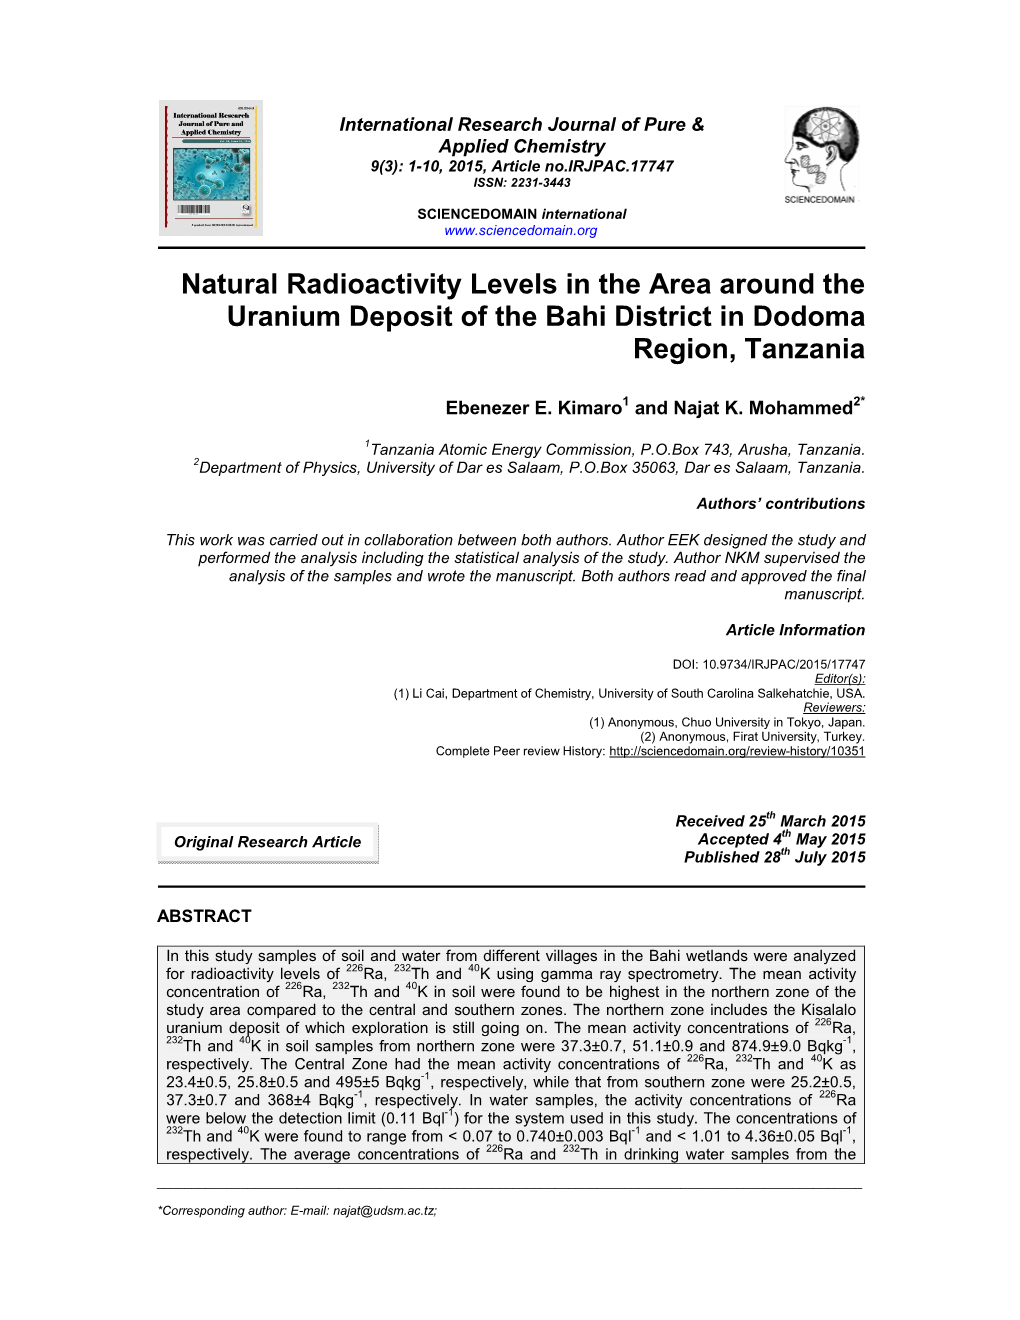 Natural Radioactivity Levels in the Area Around the Uranium Deposit of the Bahi District in Dodoma Region, Tanzania